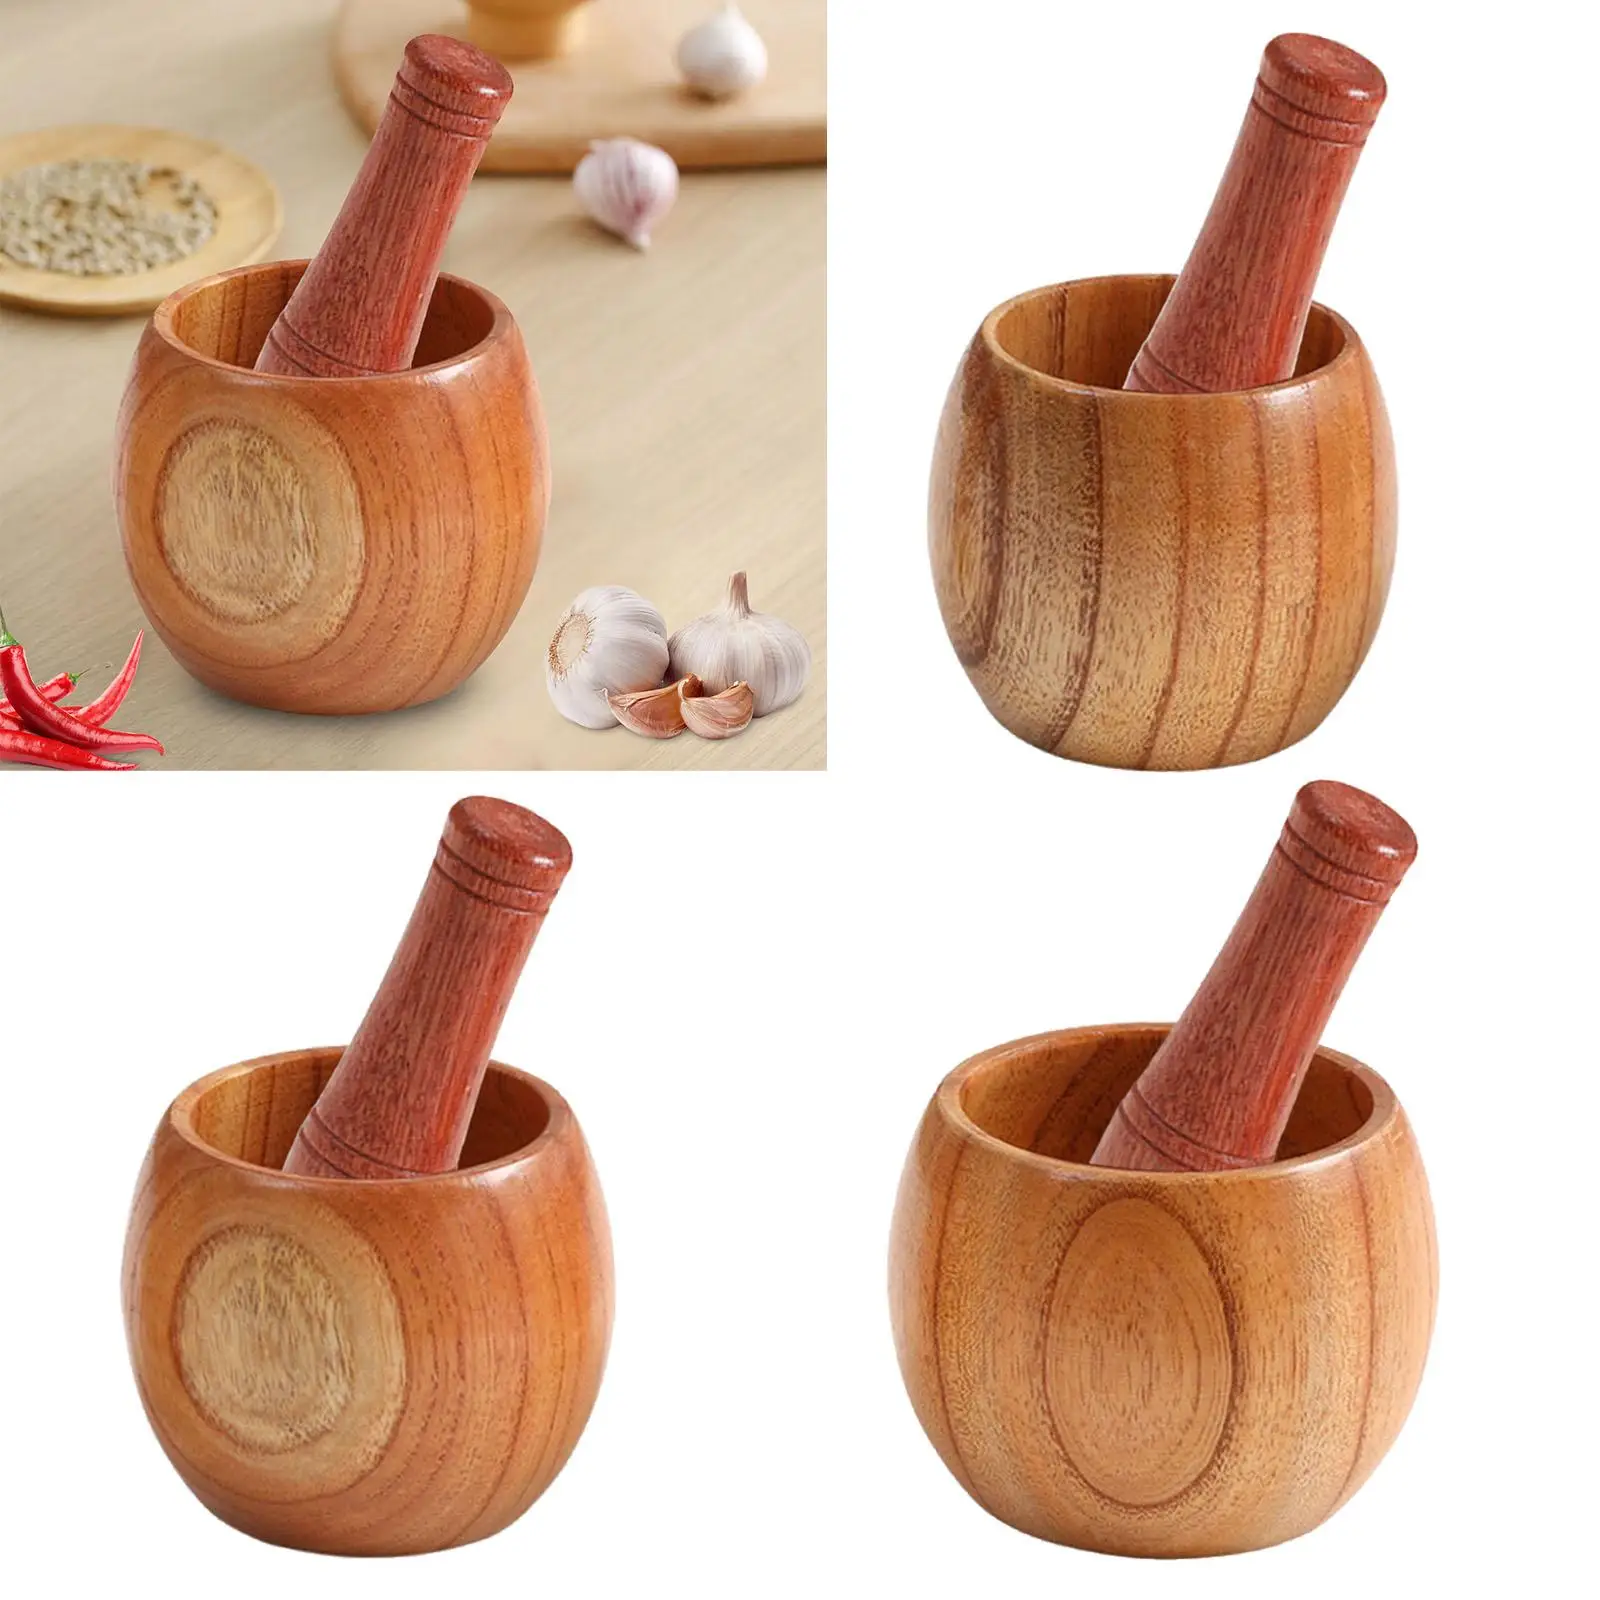 Mortar and Pestle Wooden Garlic Masher Hand Grinder Crusher Kitchen Gadgets Mixing Tool for Spice & Seasonings